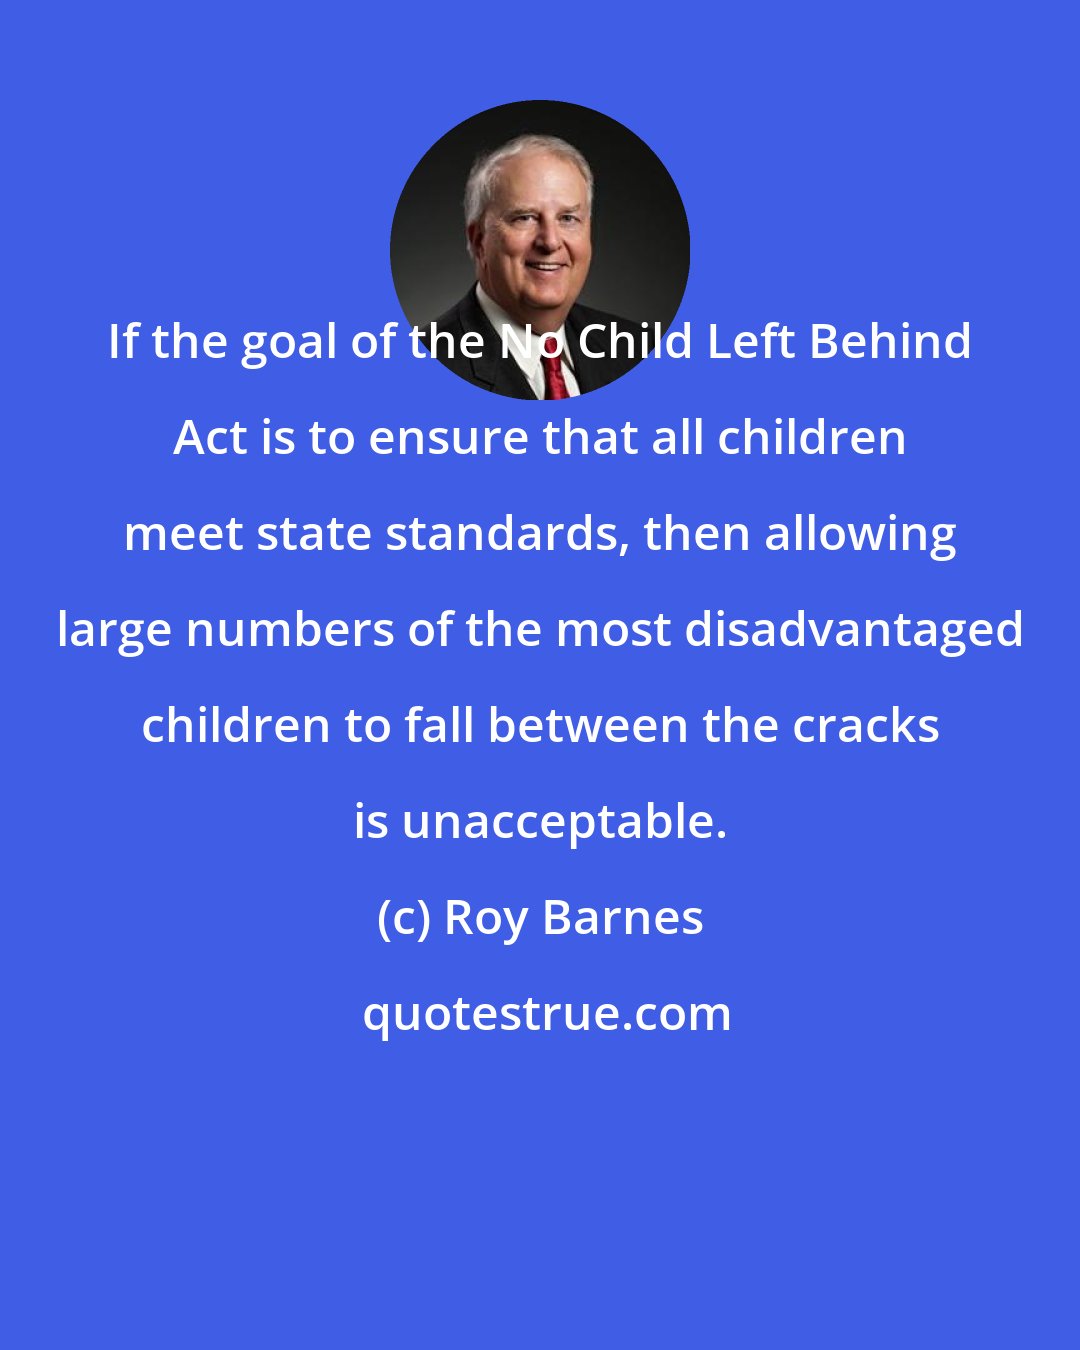 Roy Barnes: If the goal of the No Child Left Behind Act is to ensure that all children meet state standards, then allowing large numbers of the most disadvantaged children to fall between the cracks is unacceptable.